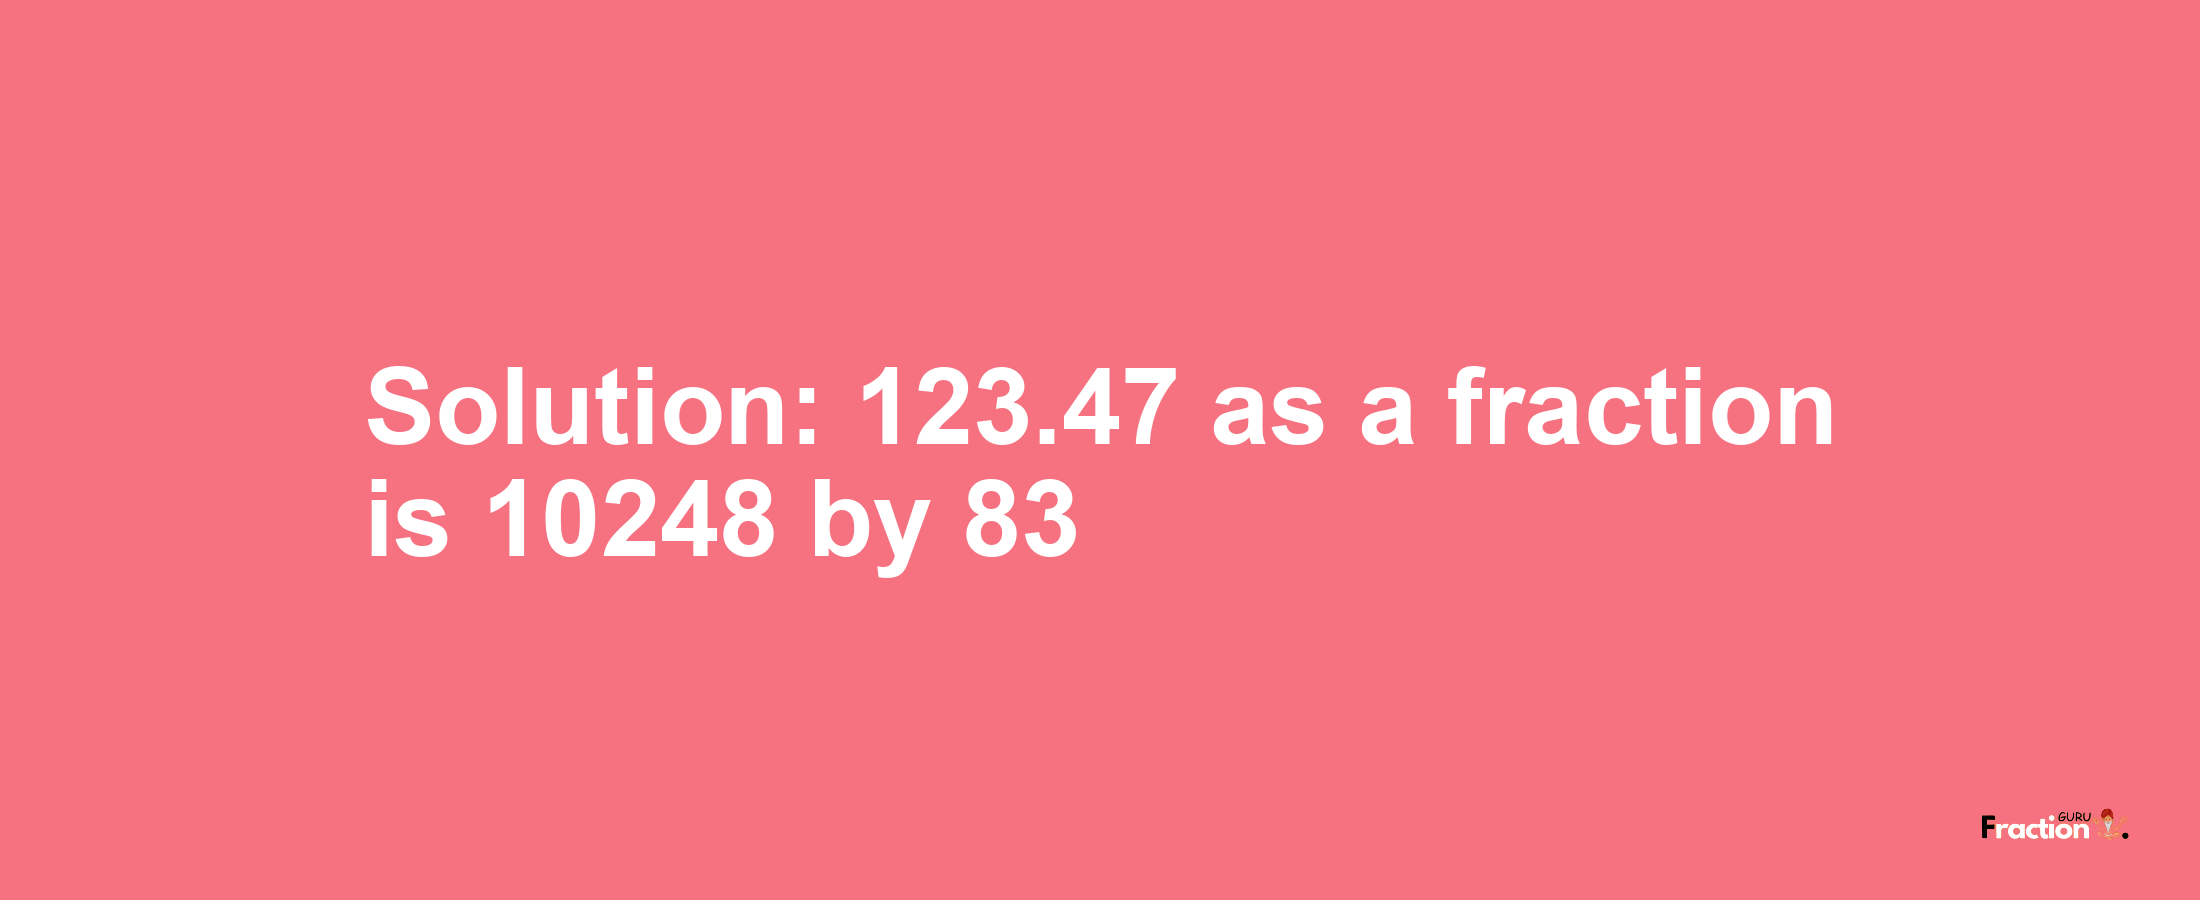 Solution:123.47 as a fraction is 10248/83